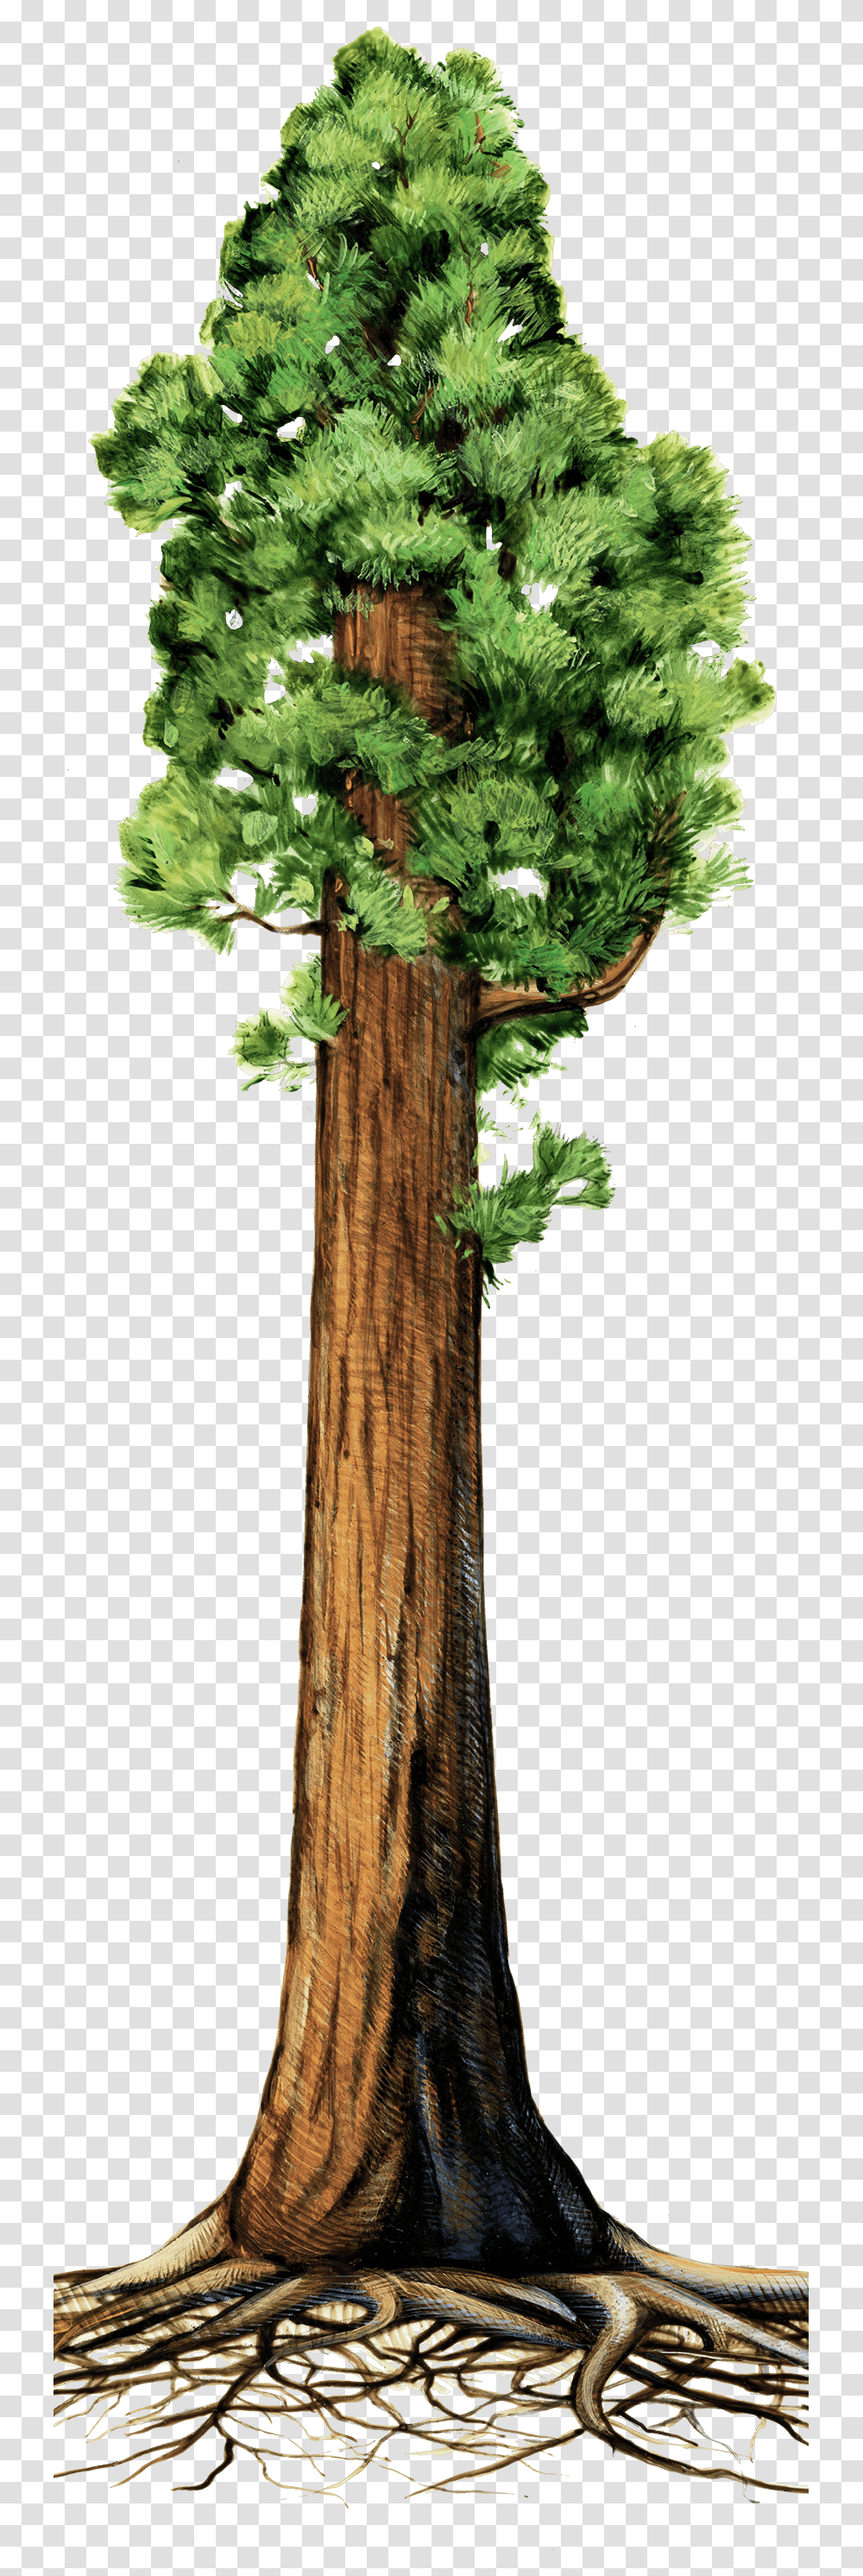 The Making Of A Giant Giant Sequoia Tree Clipart, Plant, Kale, Cabbage, Vegetable Transparent Png